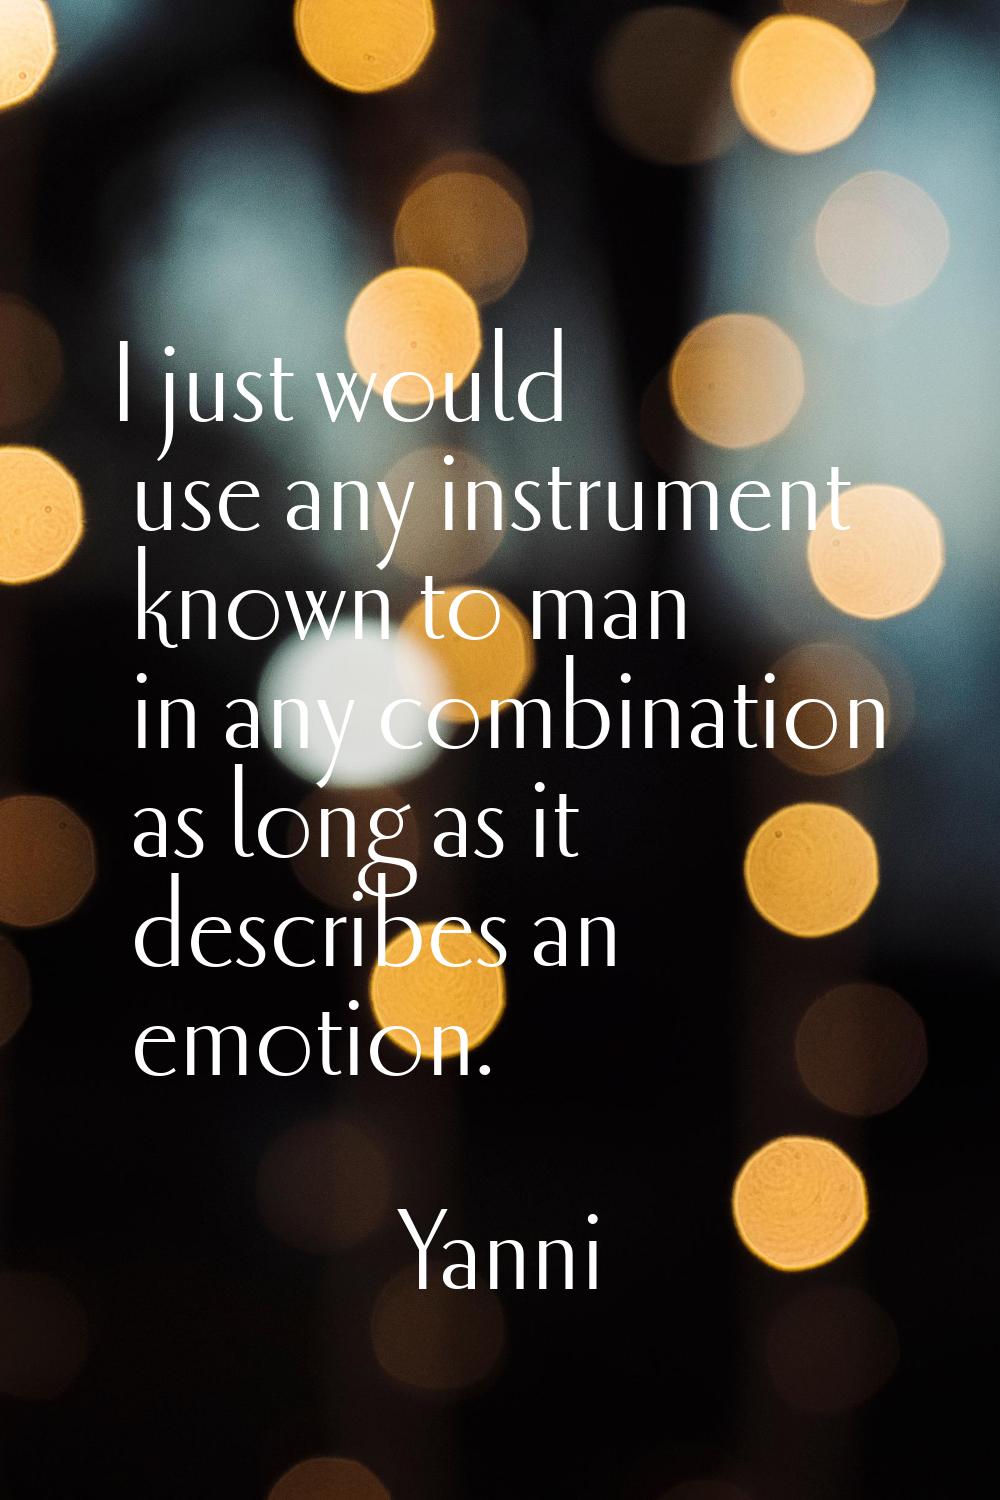 I just would use any instrument known to man in any combination as long as it describes an emotion.